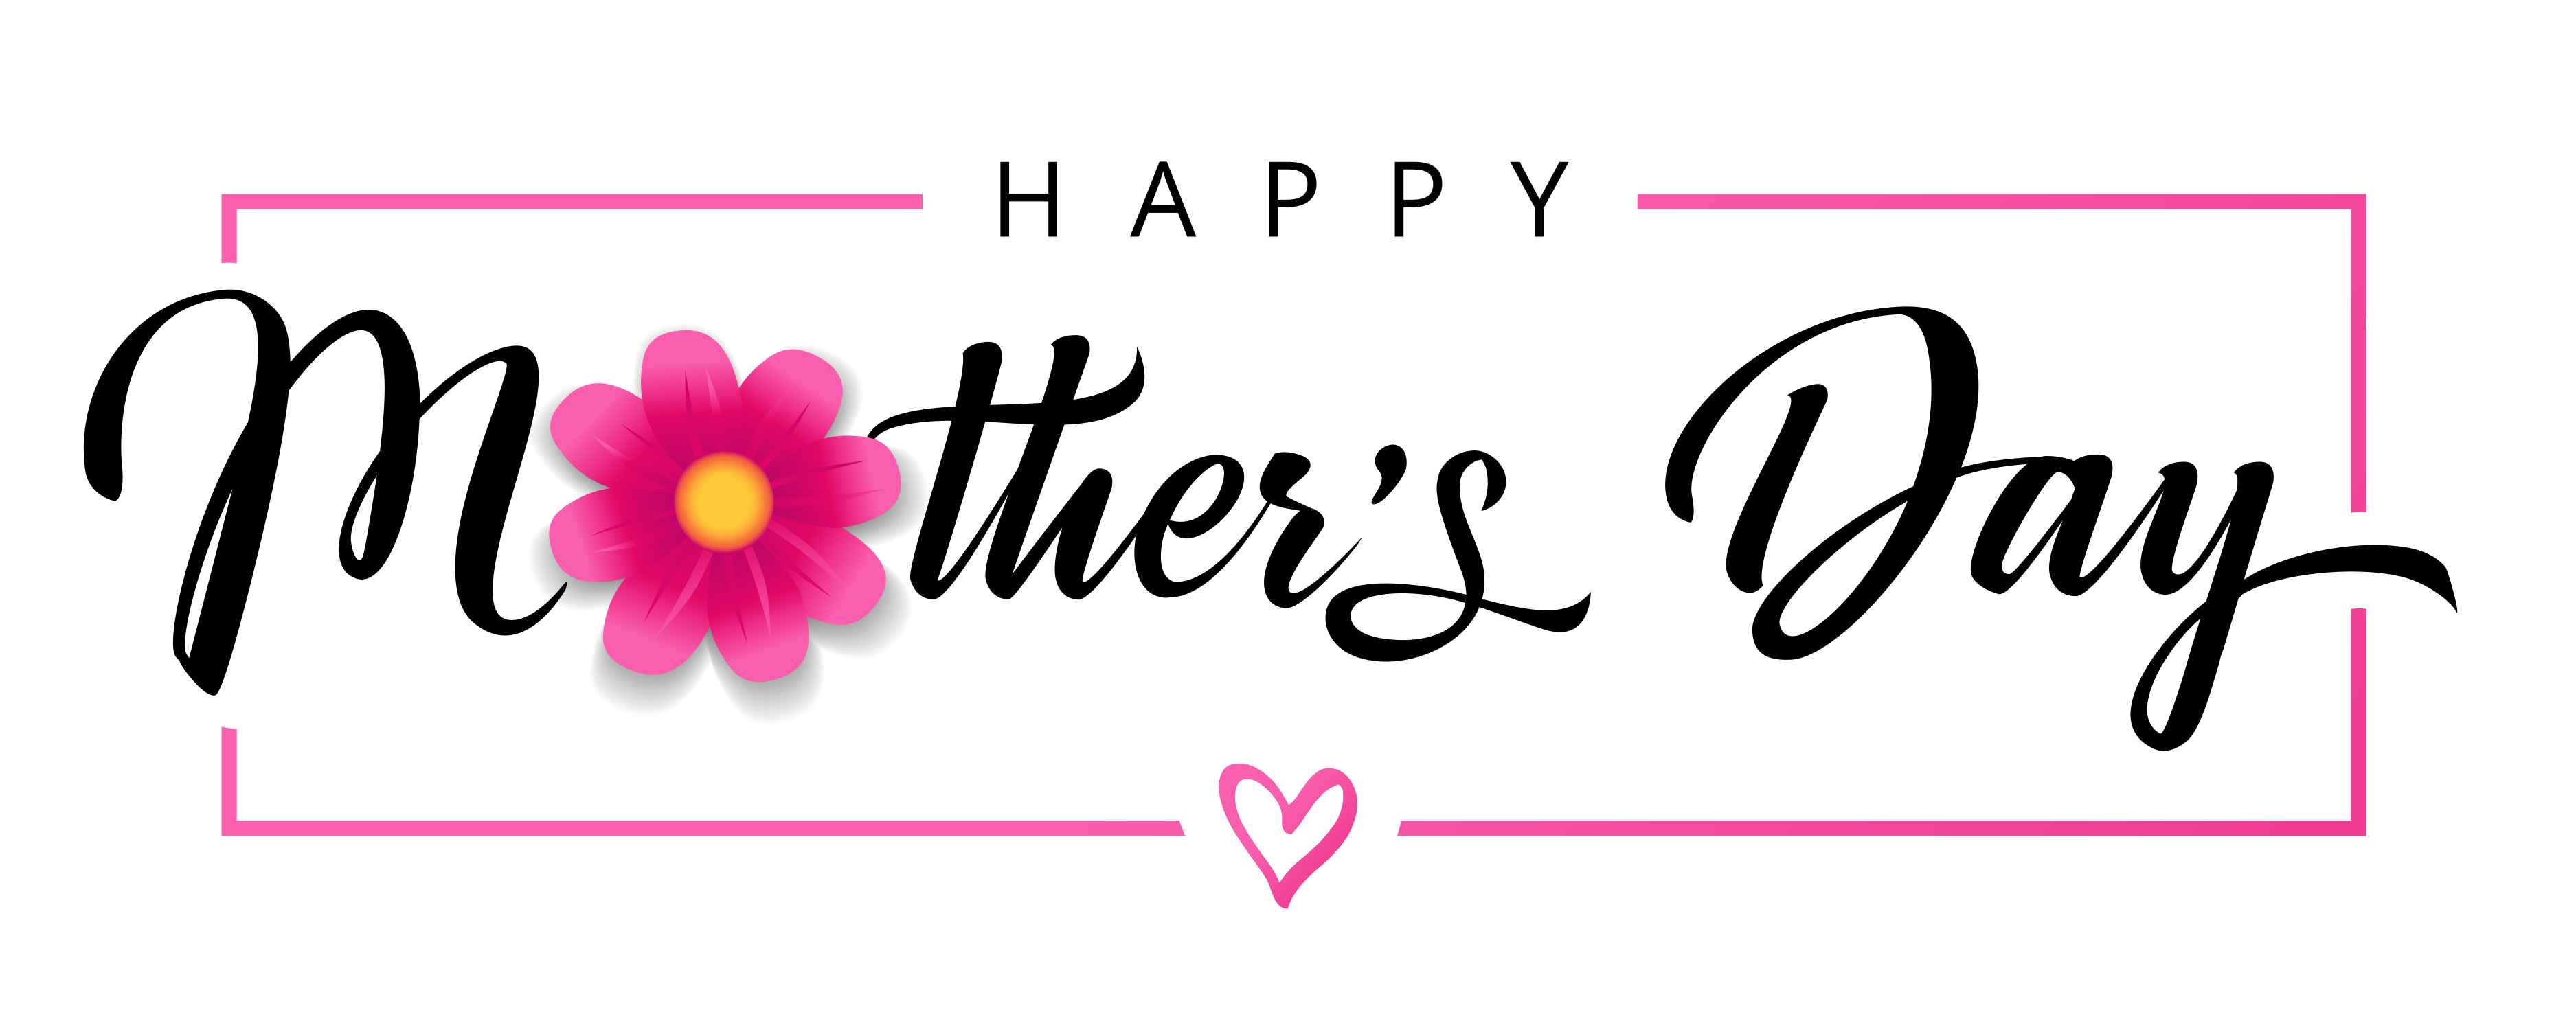 Happy Mother’s Day 2022 Wishes, Images, Status, Quotes, Messages and